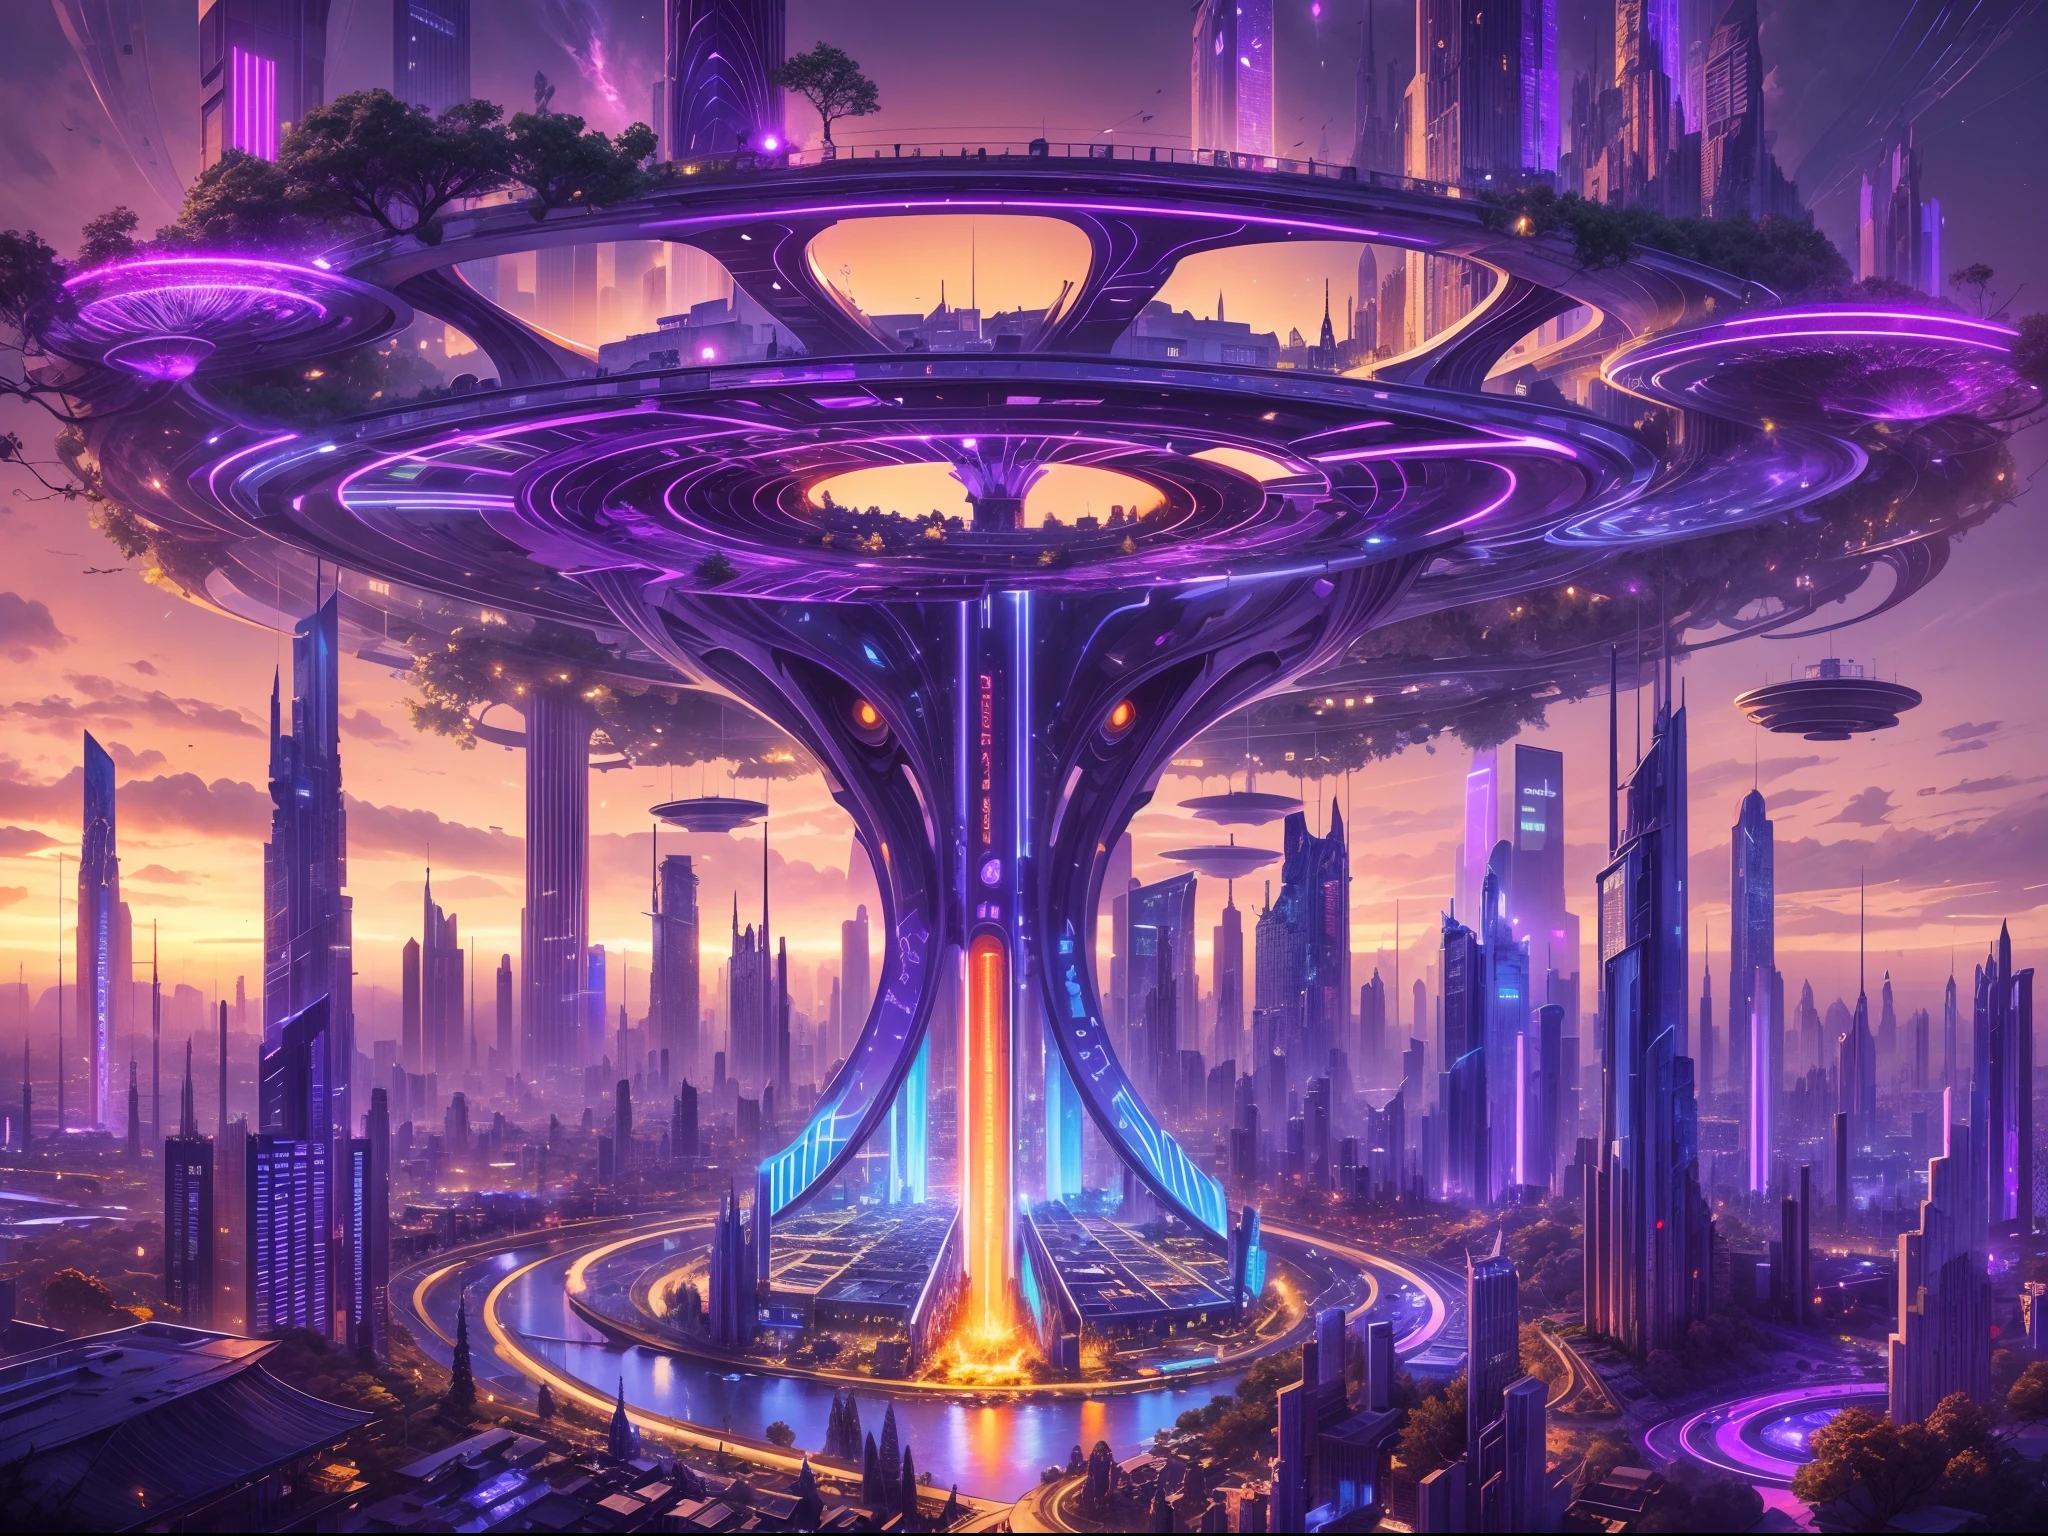 image of an otherworldly city, a futuristic city, a giant high tech pillar pierce the sky, on the body of the pillar countless of mechanic thicc and long branch, detailed futuristic houses on each branch, wide angle, ultra wide angle, capturing  all the unique city, glowing  purple and blue ray on pillar and branch, each branch is link together by high tech bridge, futuristic, night time, glowing the night, branch links together create a circular structure surround the big pillar,